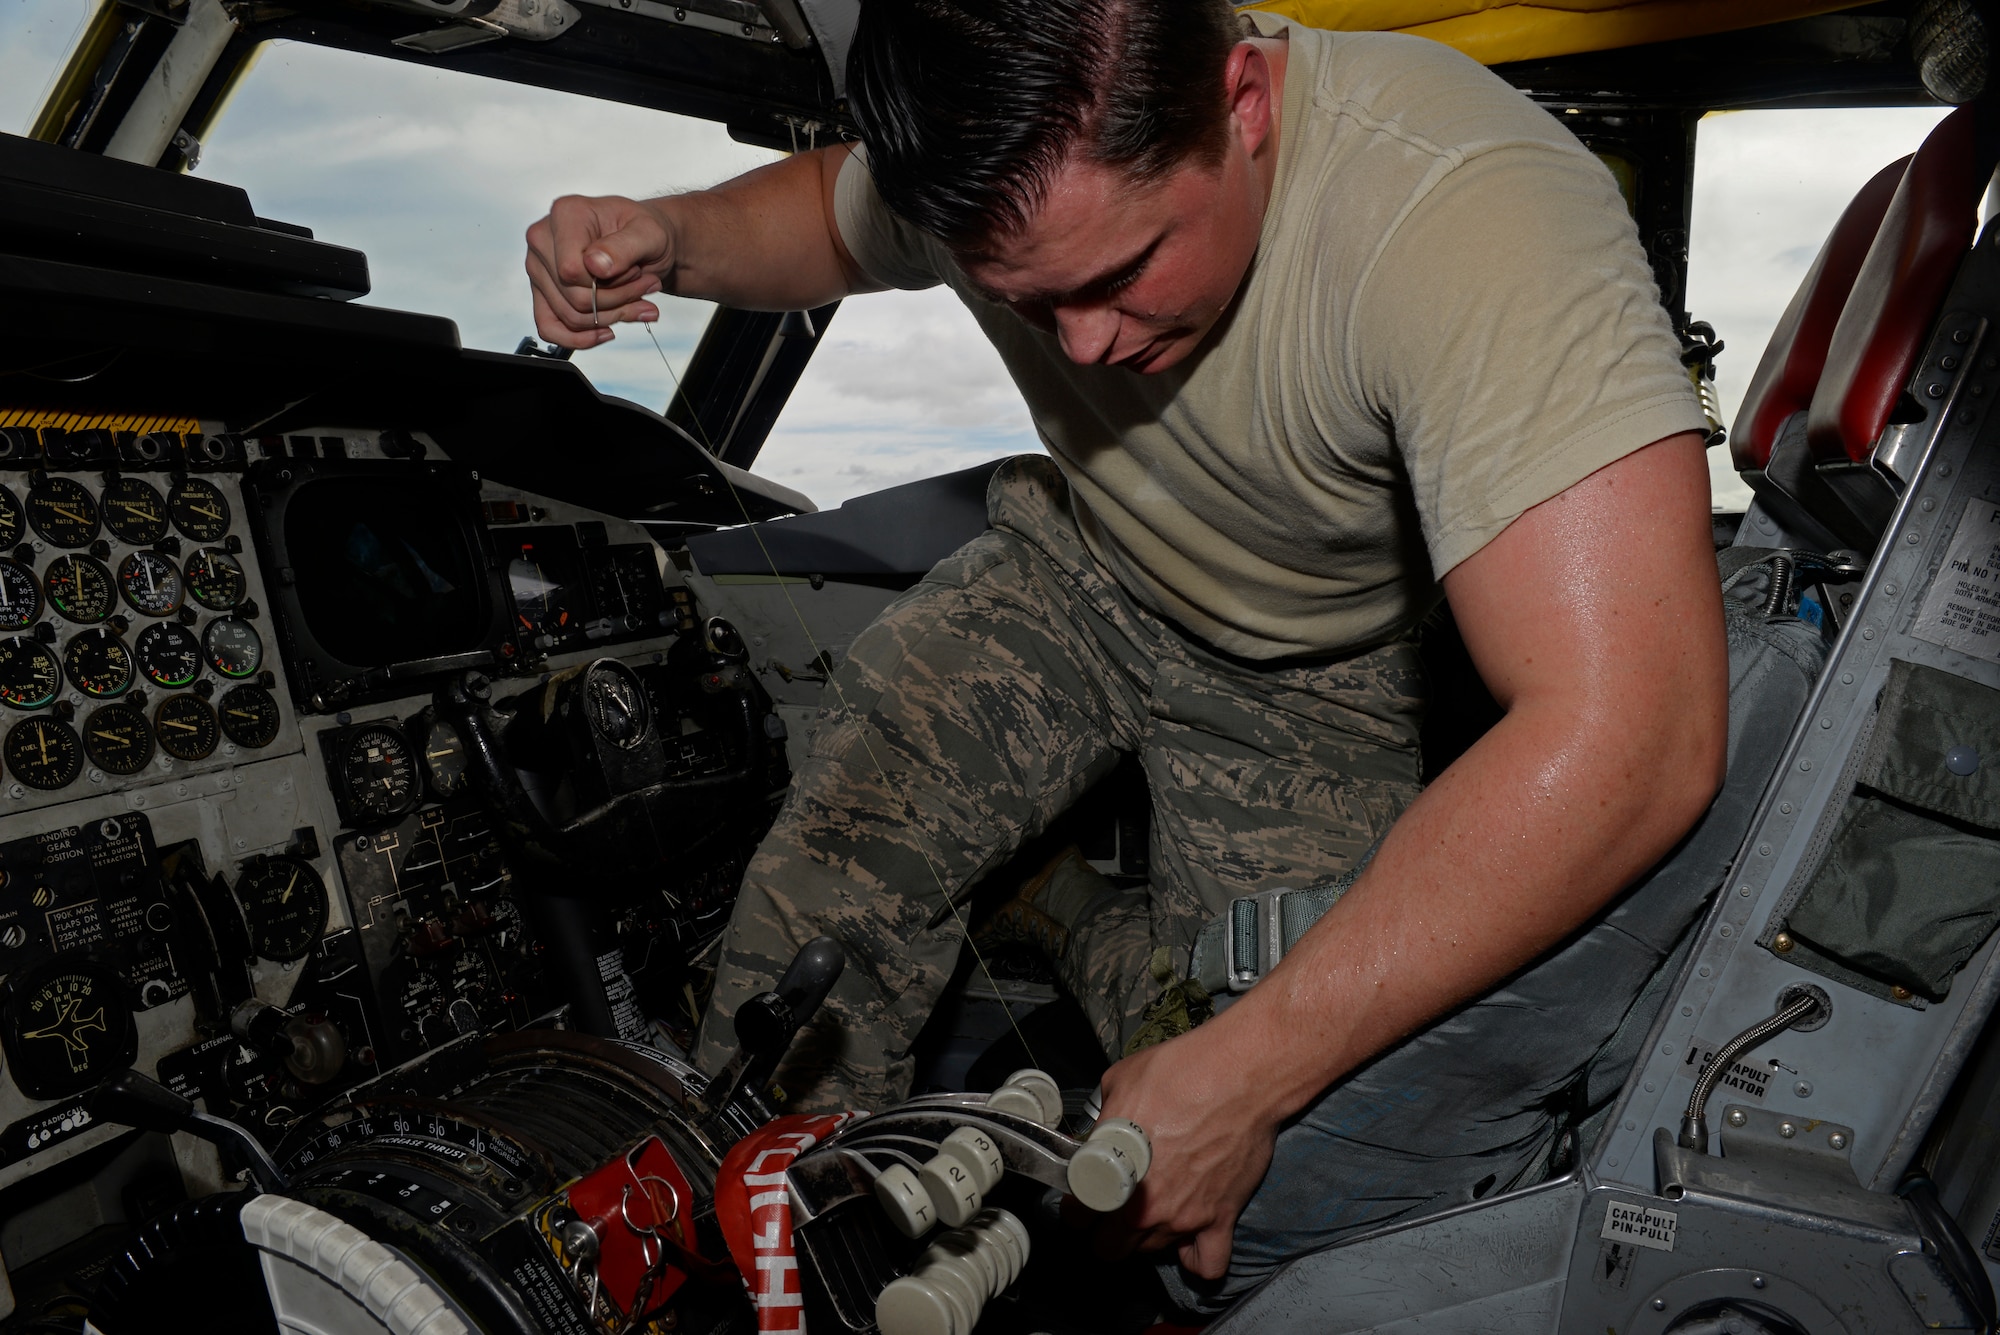 Senior Airman Tyler Shepherd, 20th Expeditionary Bomb Squadron aircrew flight equipment specialist, tightens up the stitching of a parachute flashlight pocket Aug. 12, 2015, at Andersen Air Force Base, Guam. AFE specialists repair and maintain vital life support equipment for aviators. (U.S. Air Force photo by Staff Sgt. Alexander W. Riedel/Released)